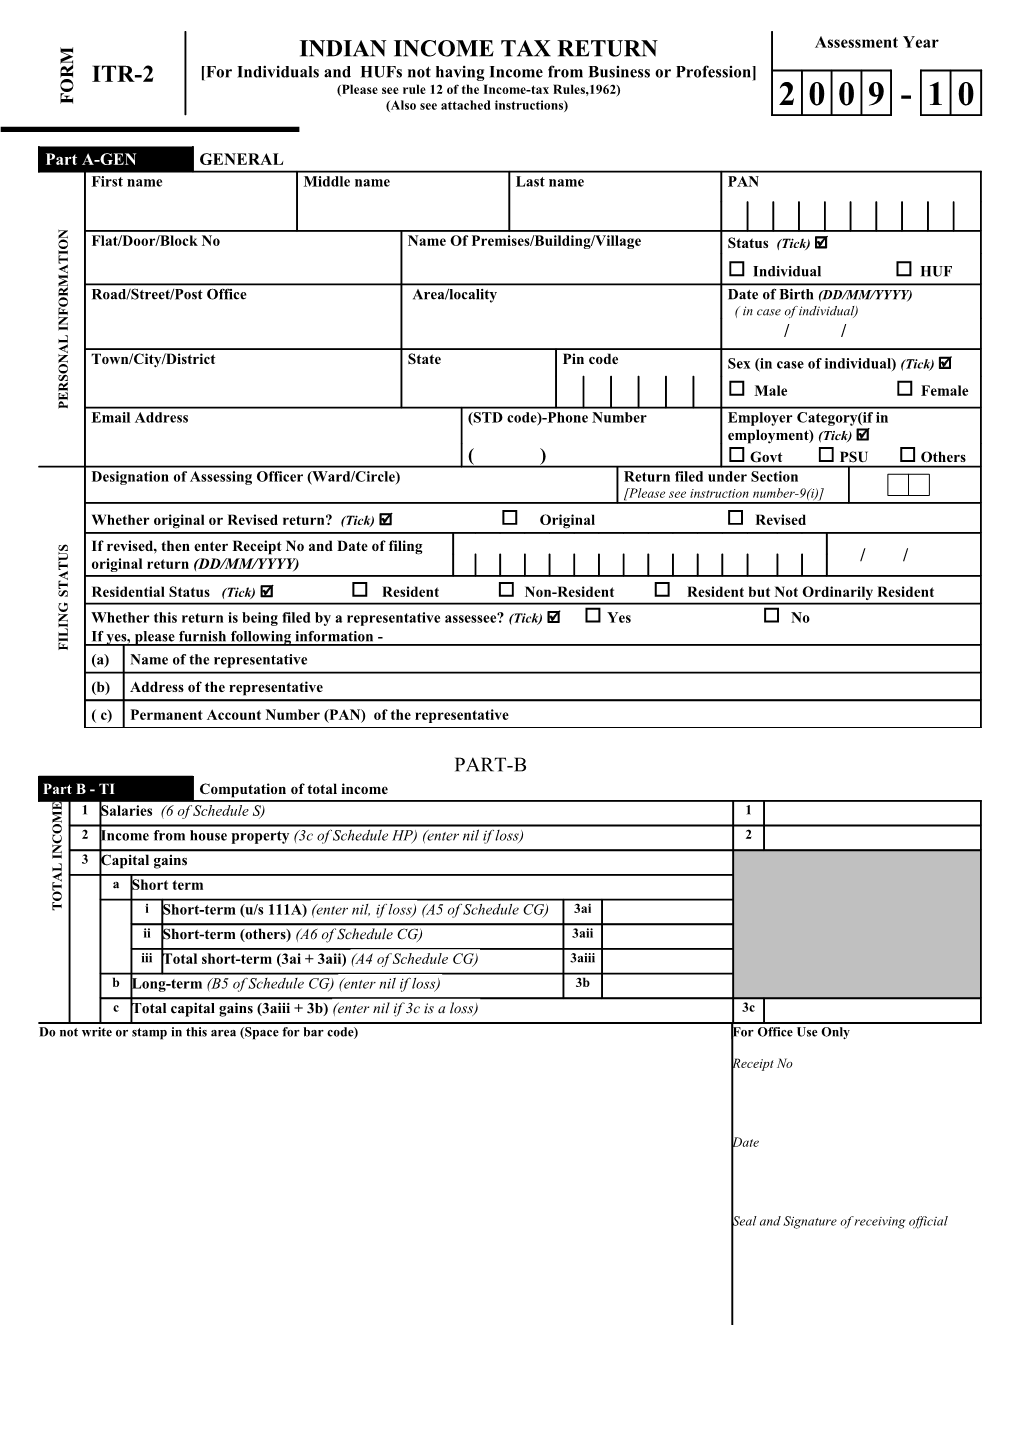 Instructions for Filling out FORM ITR-2